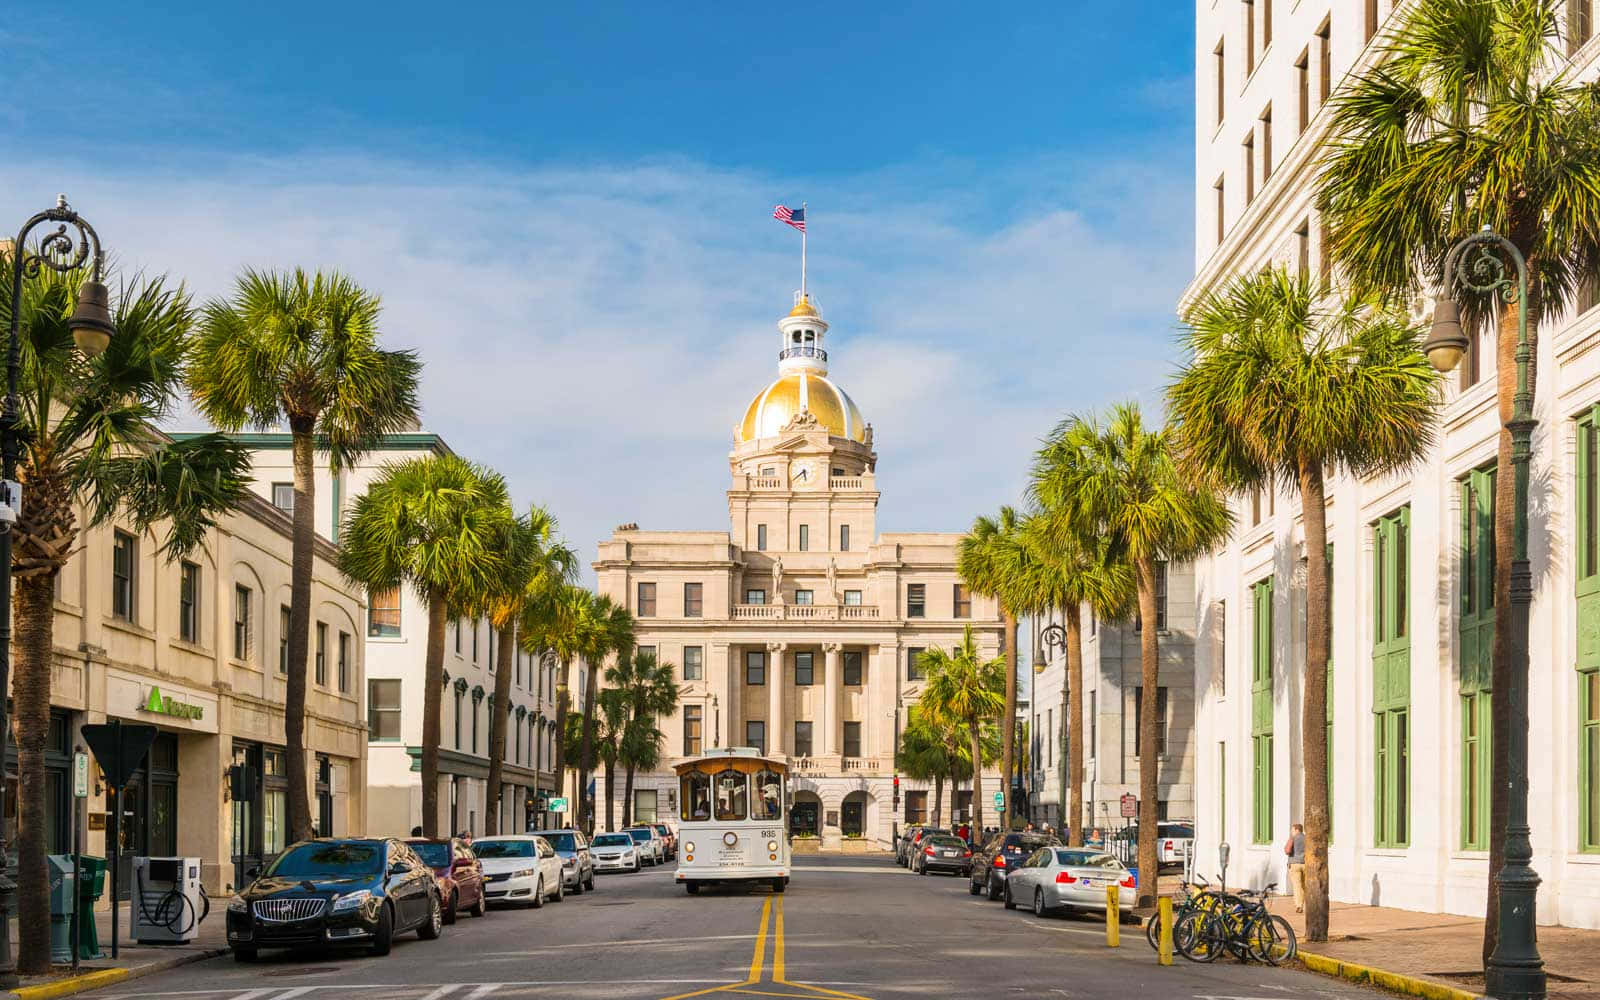 Charleston, South Carolina - A City With Palm Trees And A Tall Building